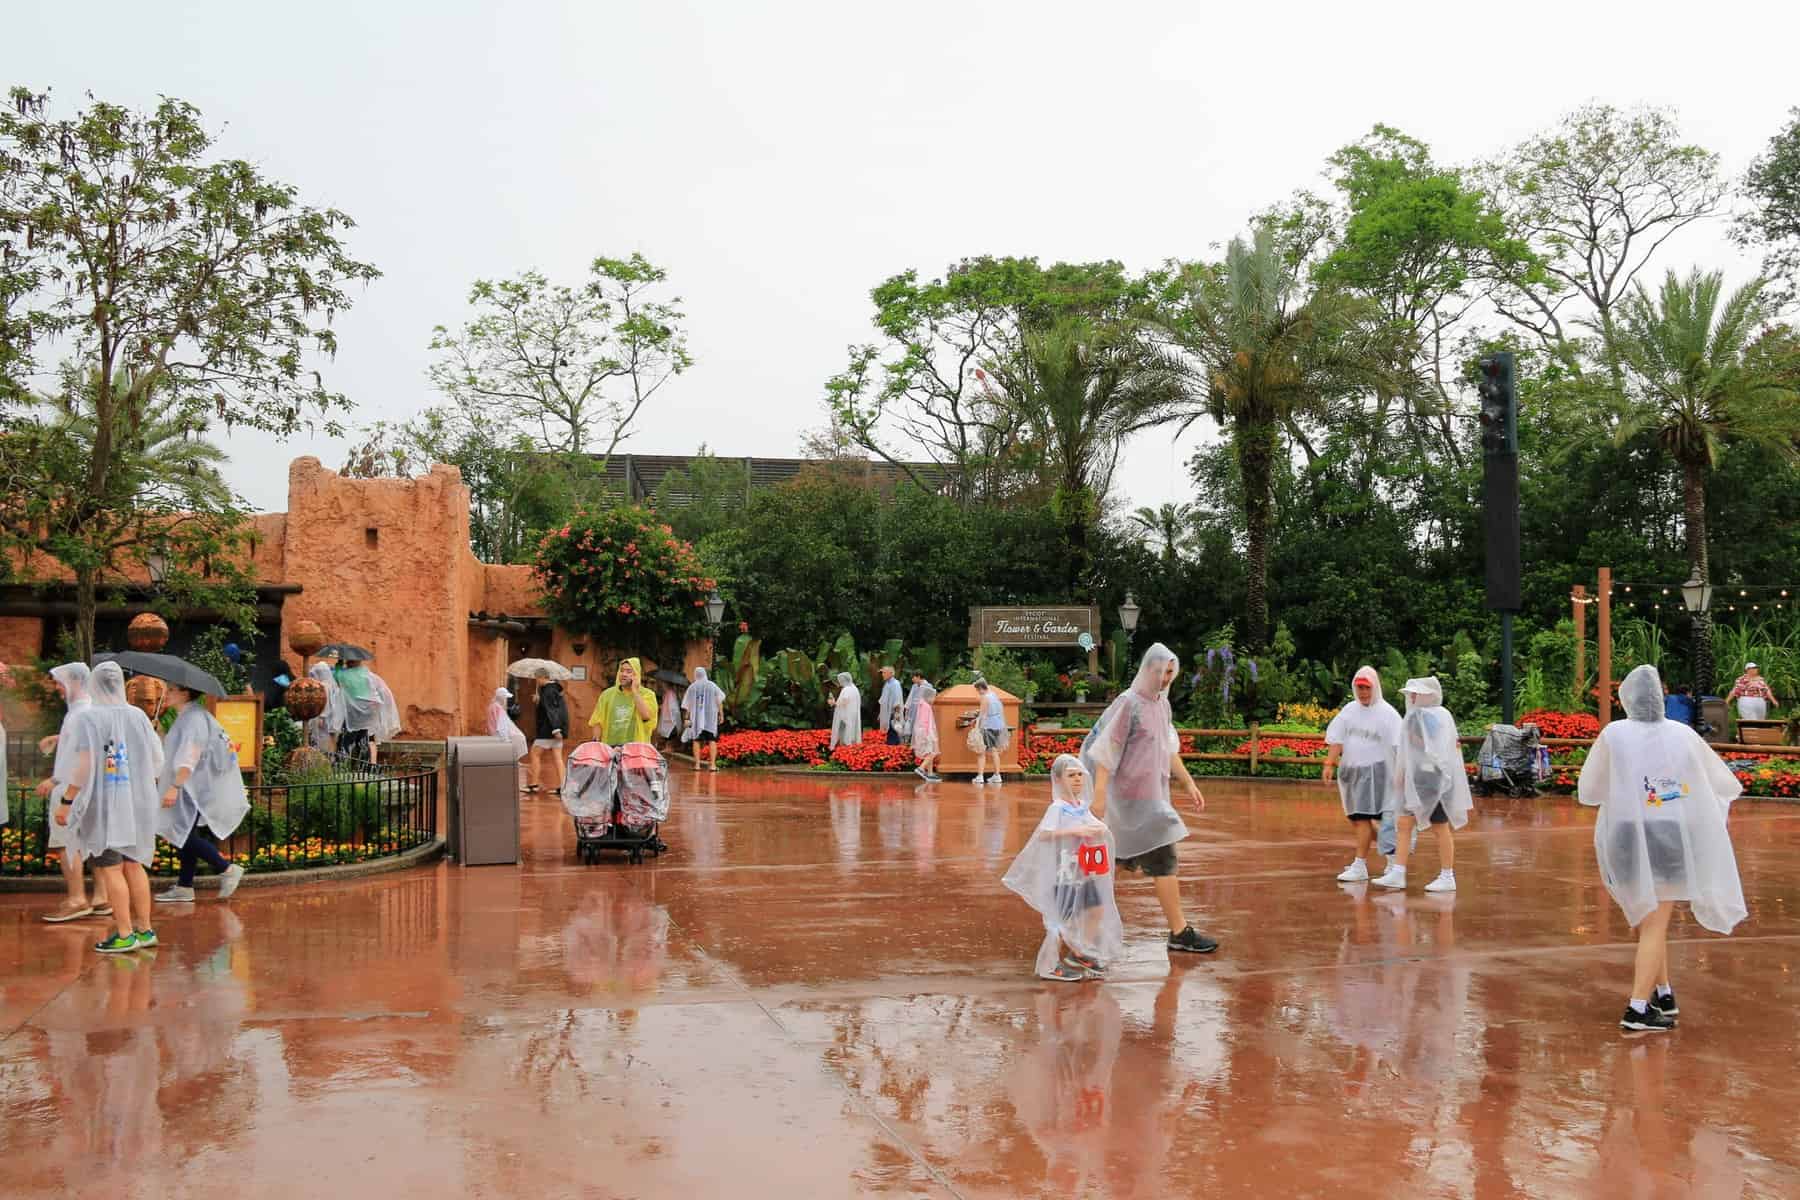 What to do when it rains at Disney World